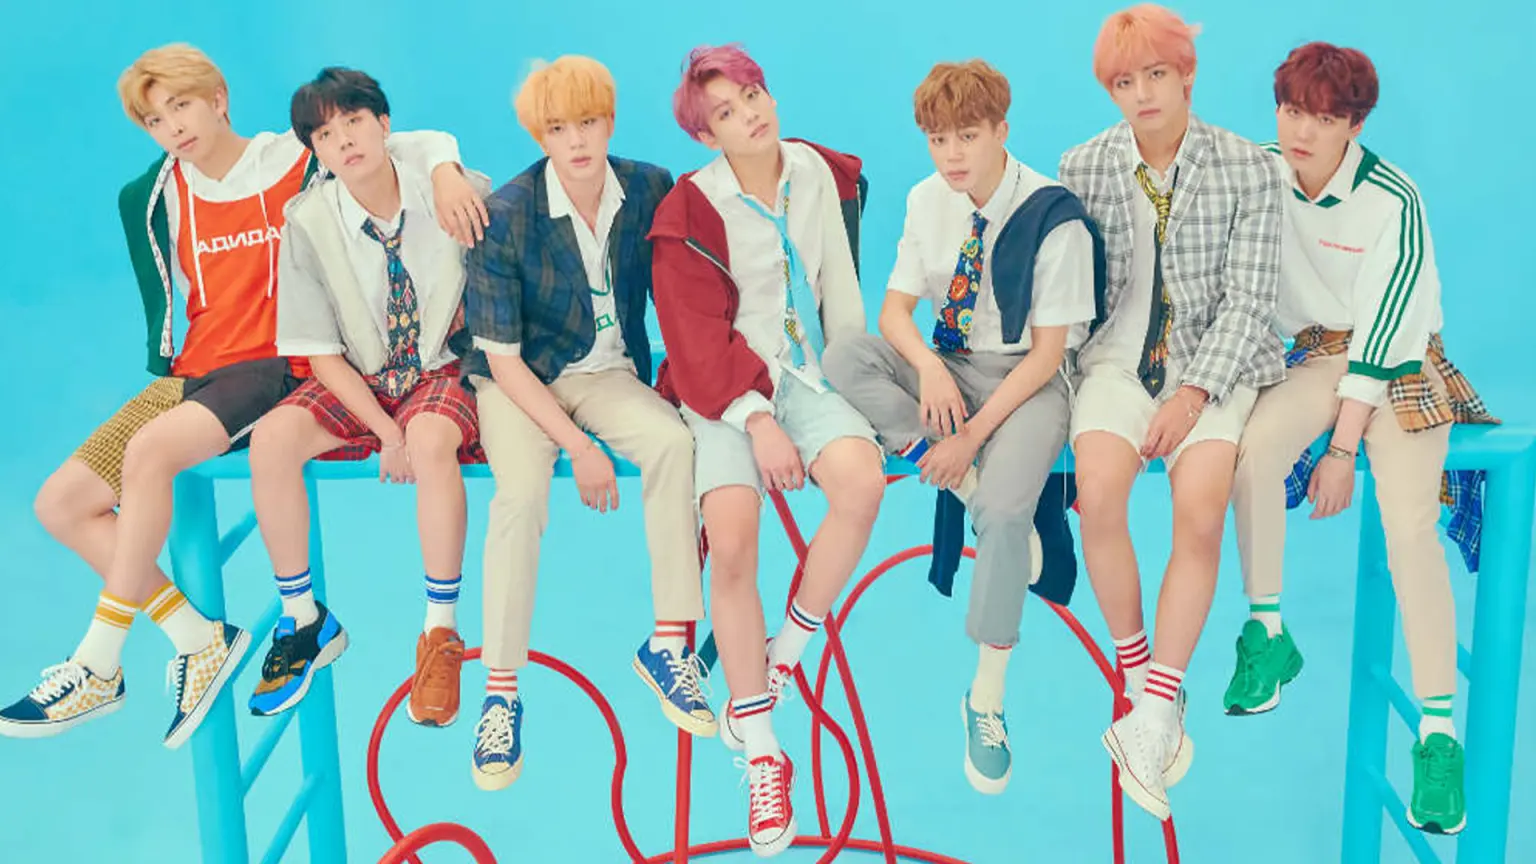 BTS sitting on some kind of climbing frame